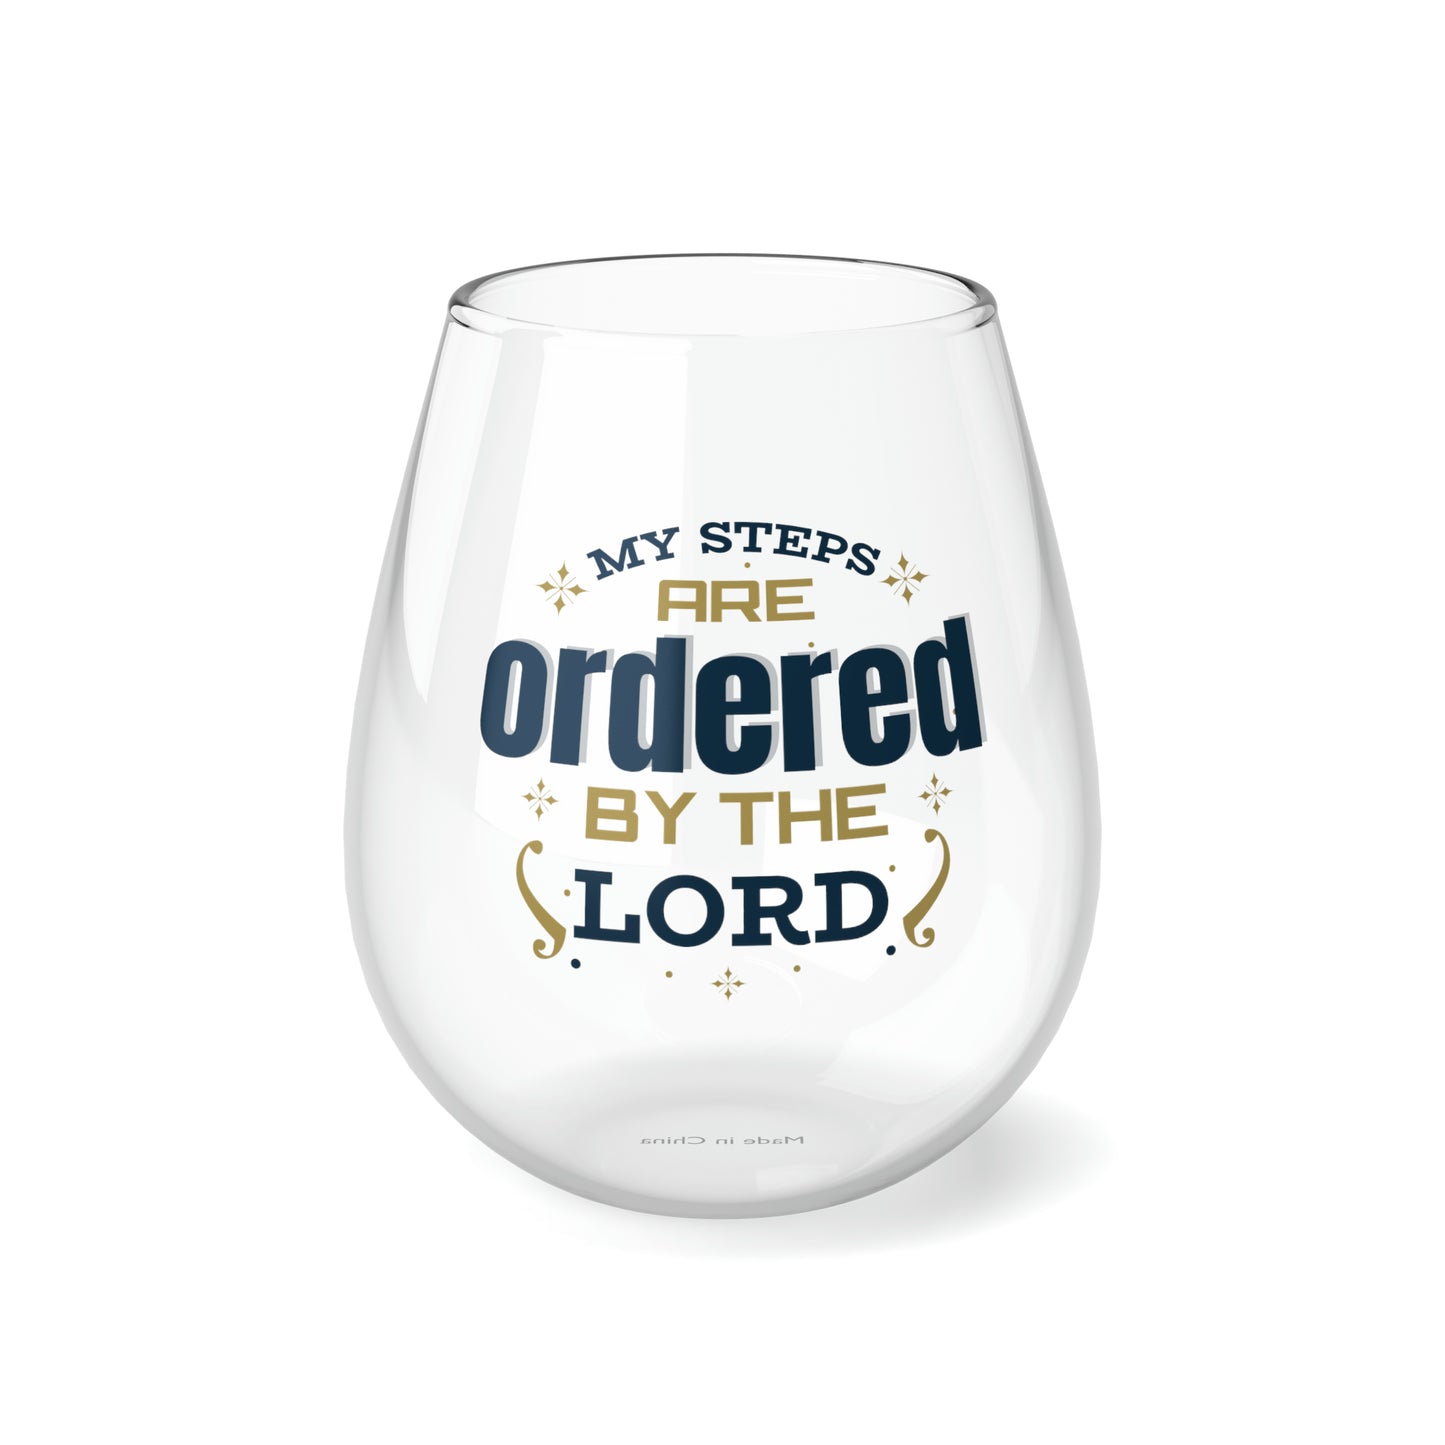 My Steps Are Ordered By The Lord Stemless Wine Glass, 11.75oz